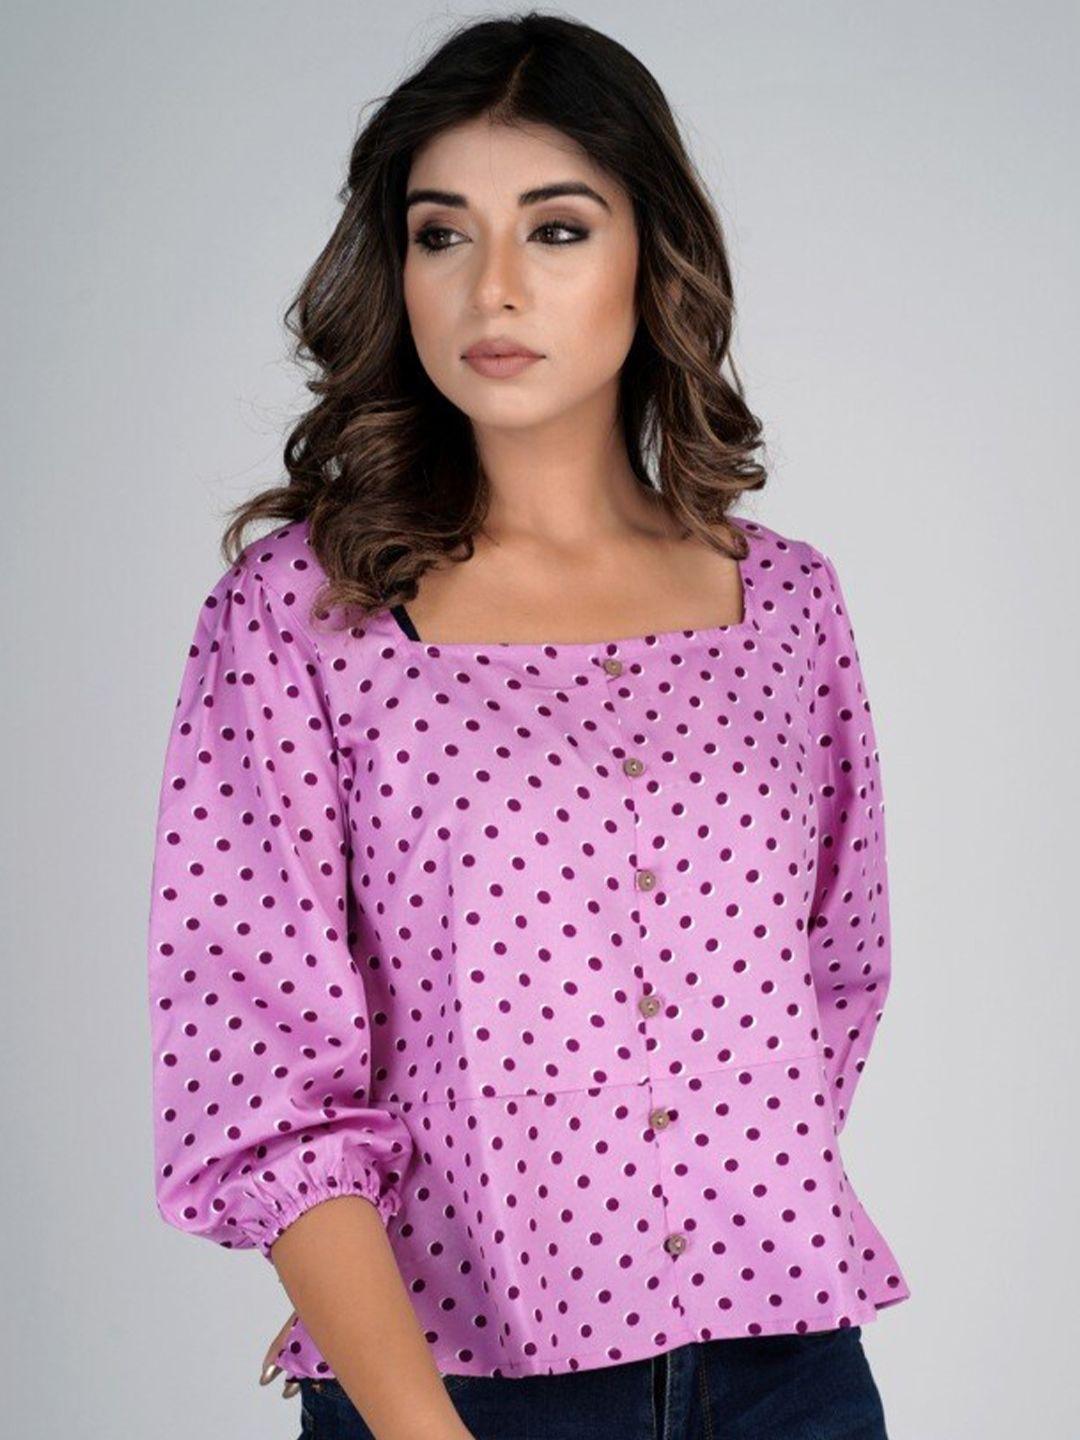 here&now-polka-dots-printed-square-neck-puffed-sleeves-blouson-top